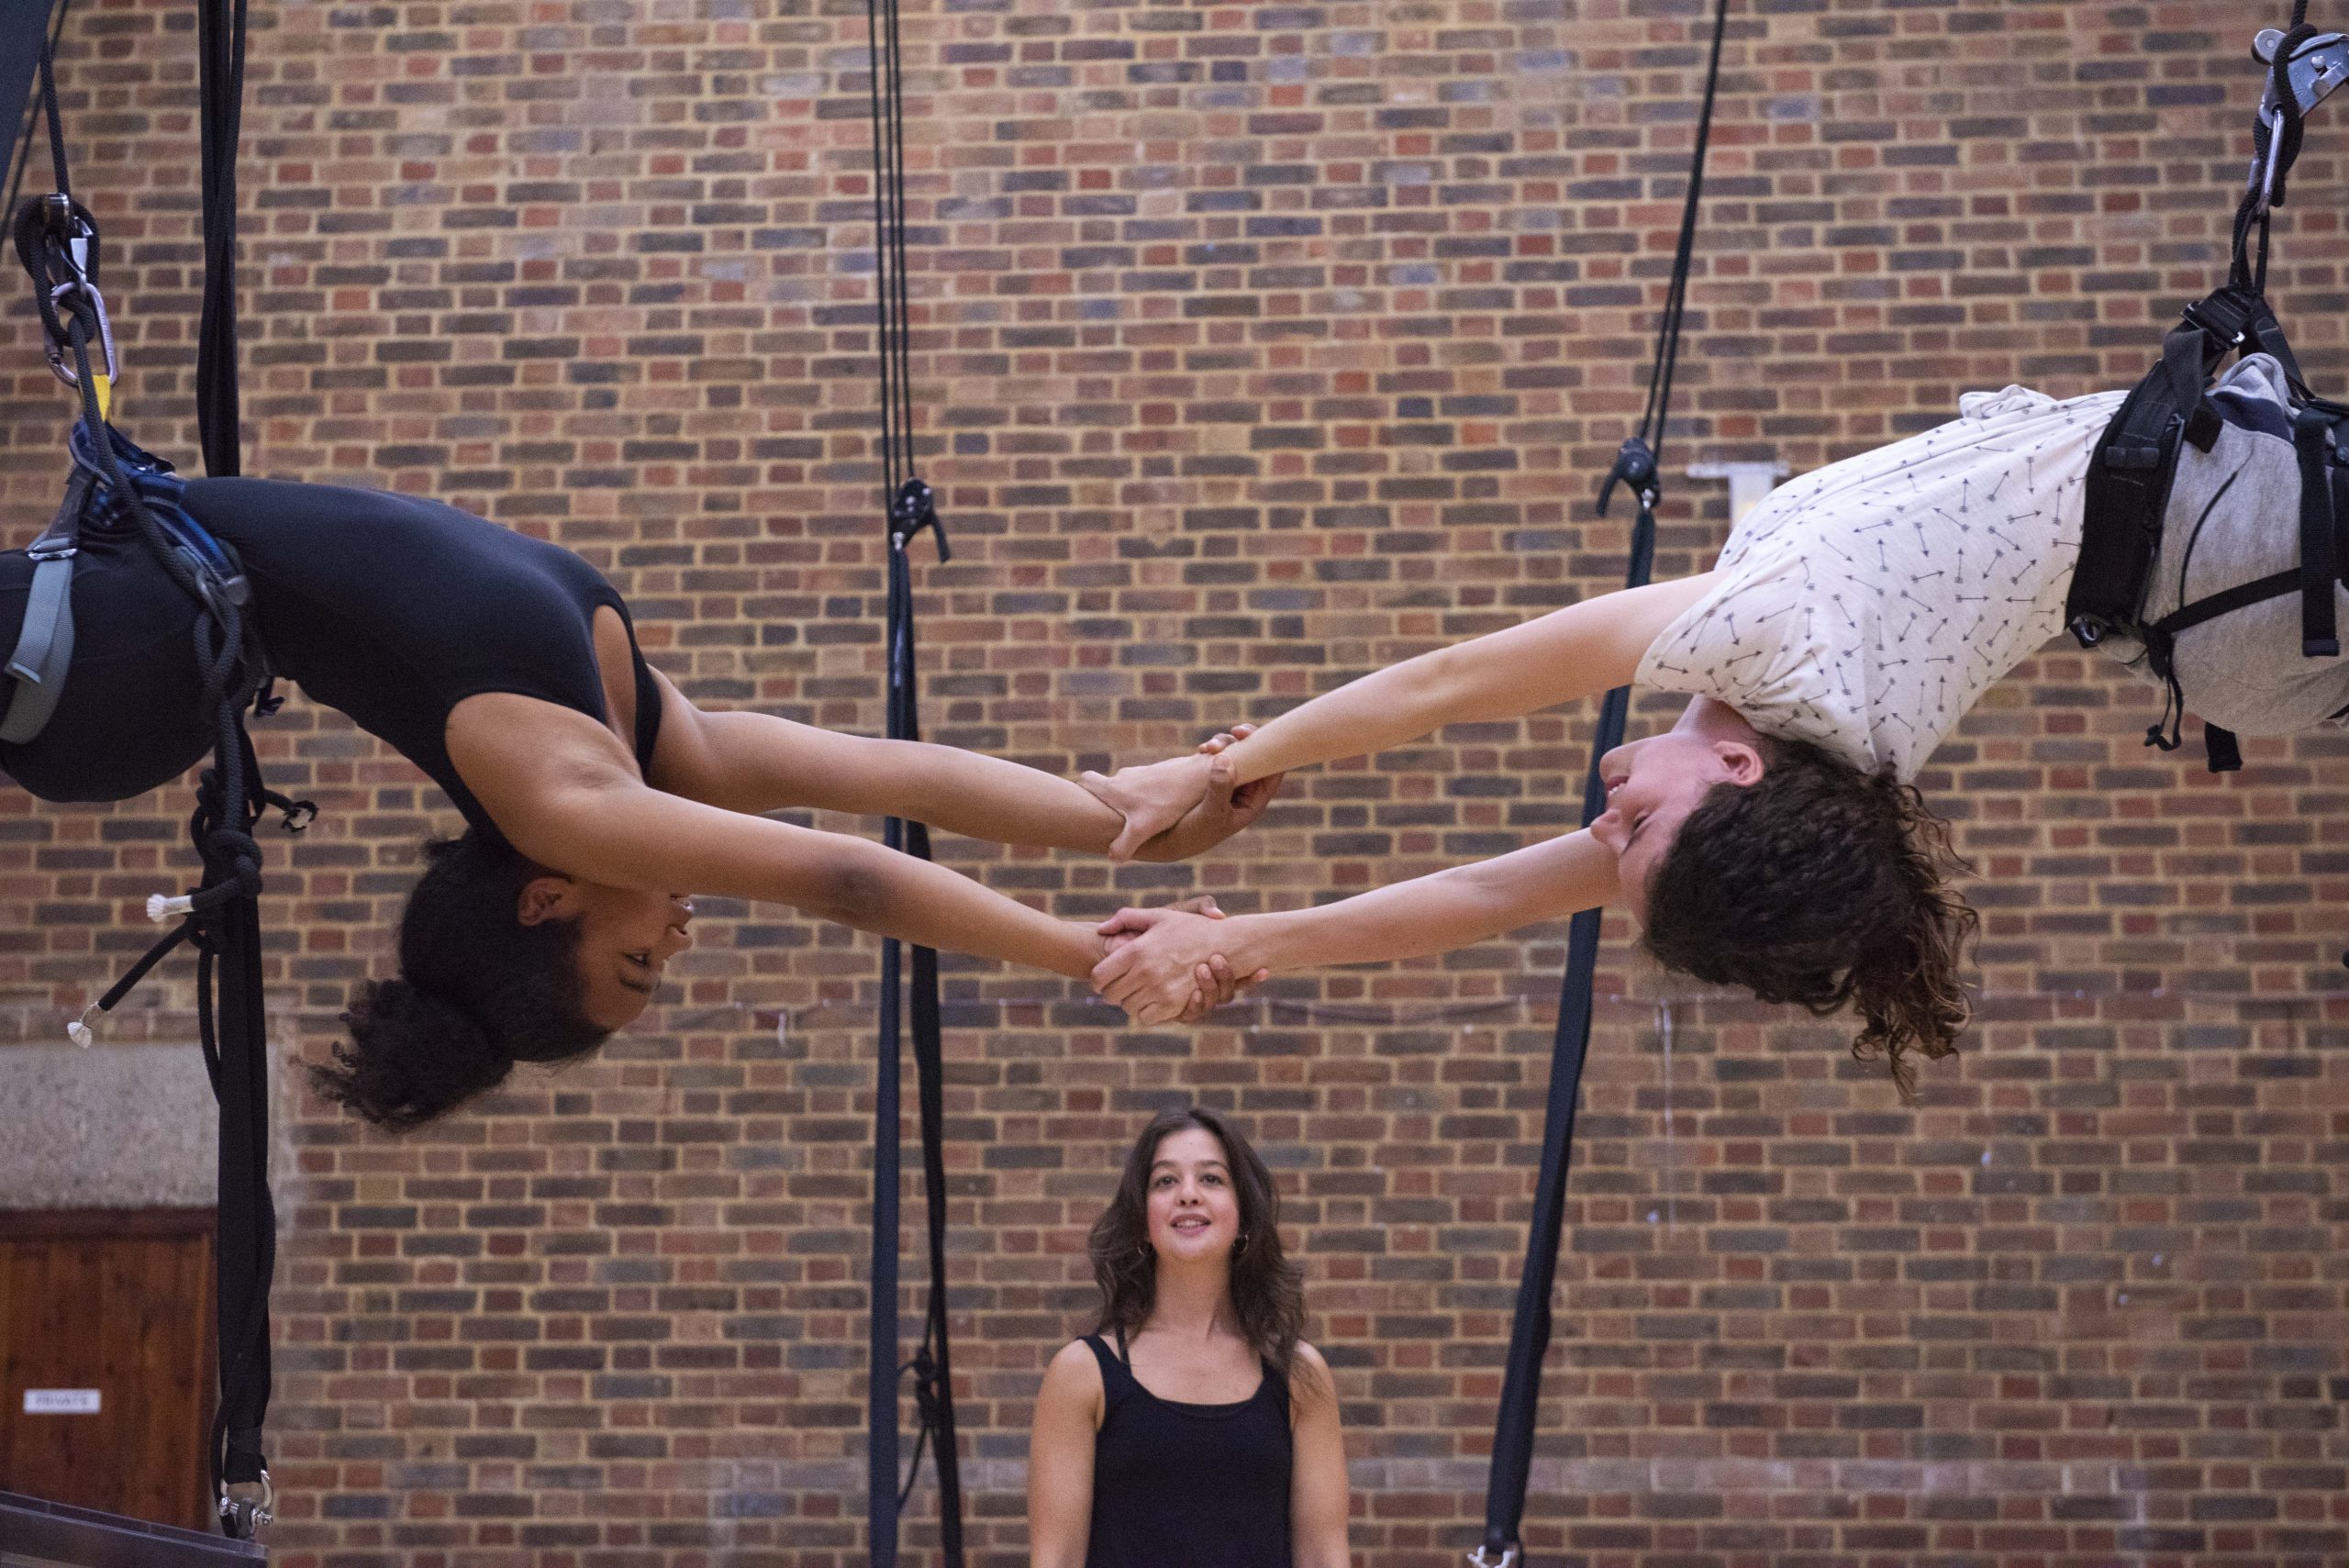 Two young aerialists in harnesses are suspended in the air, they clasp each others hands to link them across the image. Below another person stand in the middle underneath them smiling up at them.